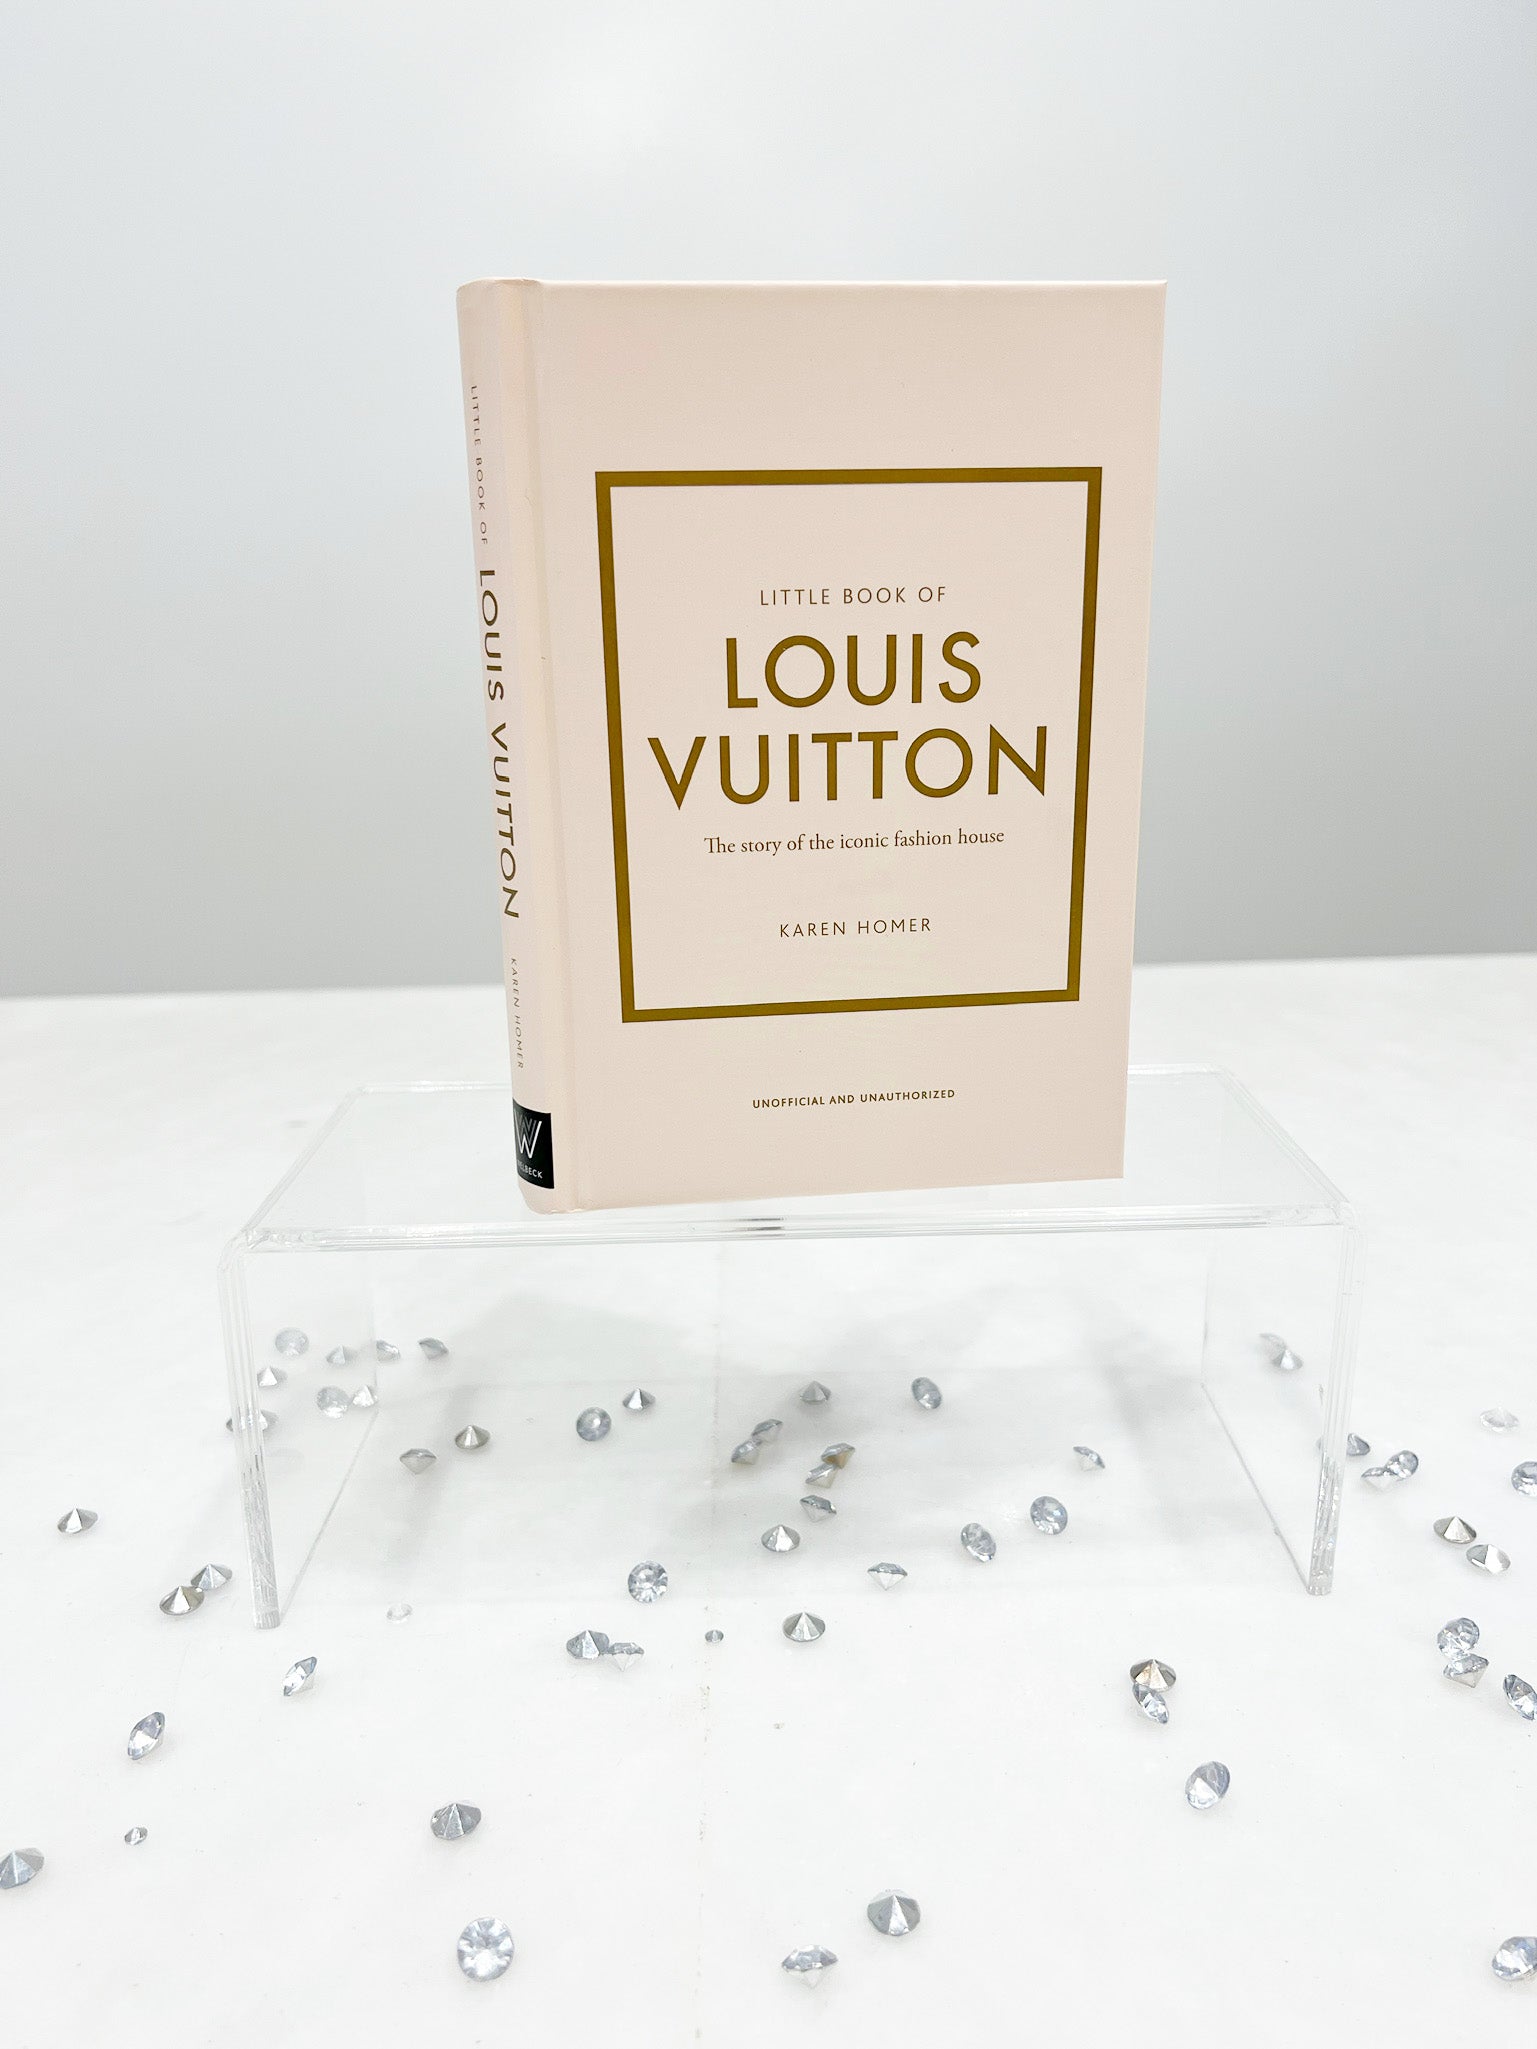 Little Book of Louis Vuitton Leather Bound Edition